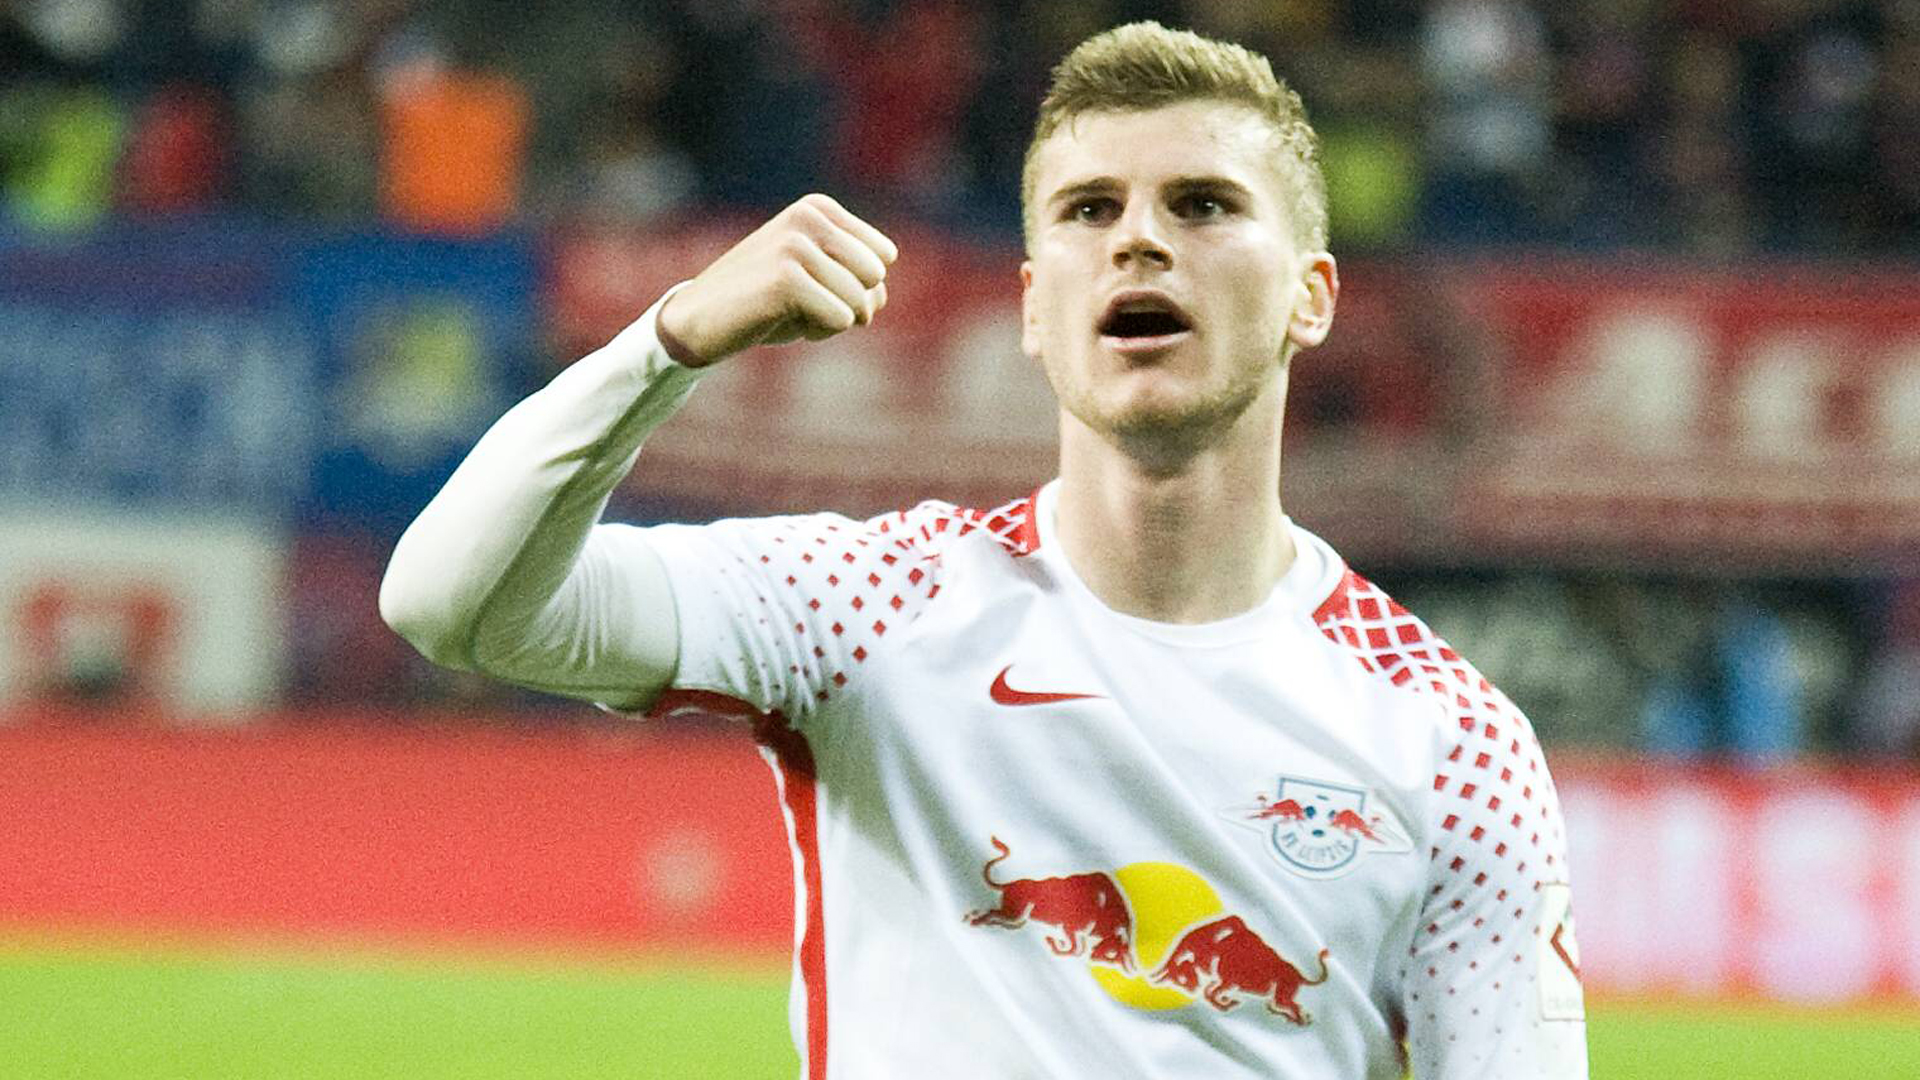 timo werner - photo #36